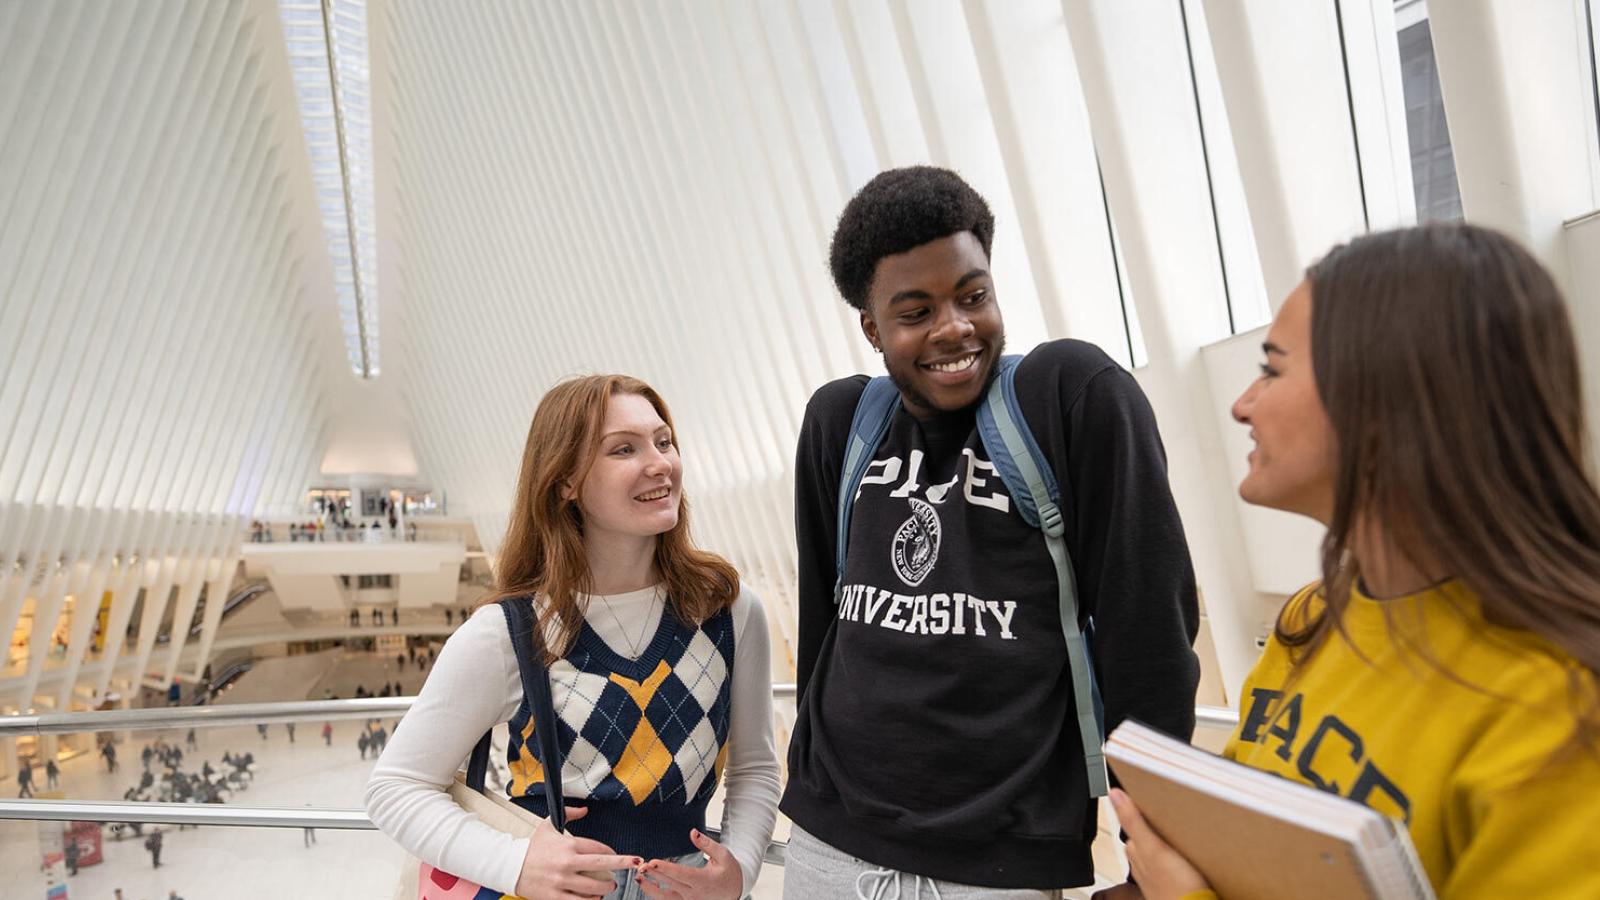 Three Pace University students talking in the Oculus train station in downtown Manhattan